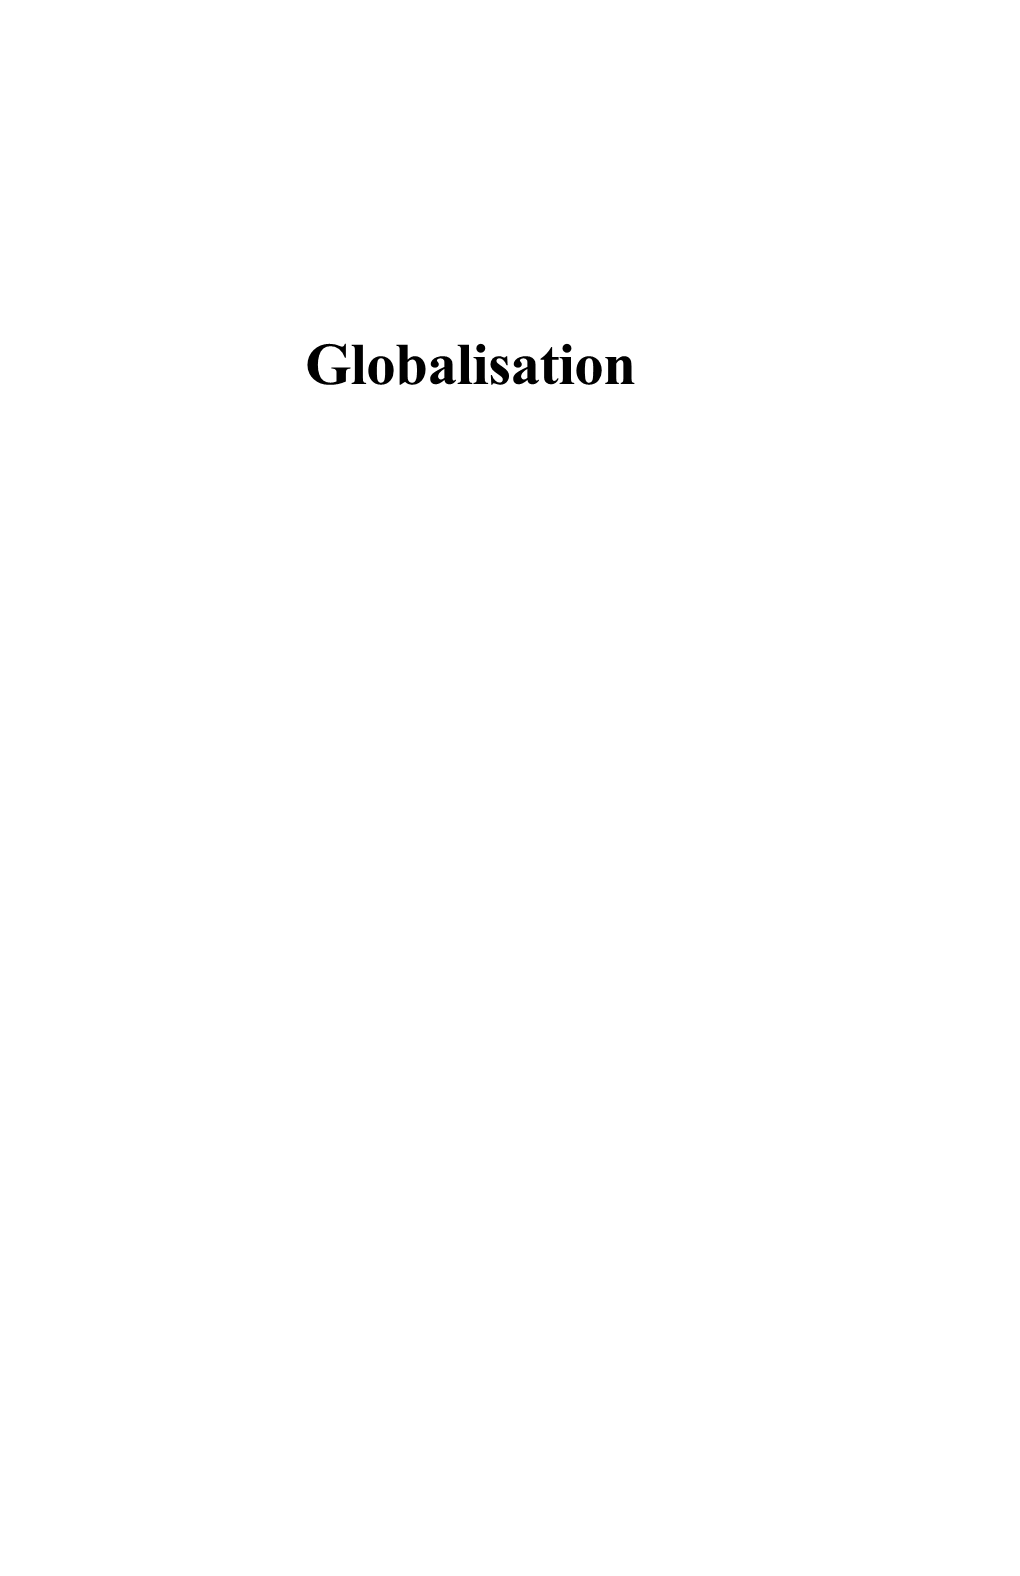 2.Controversy About the Globalization